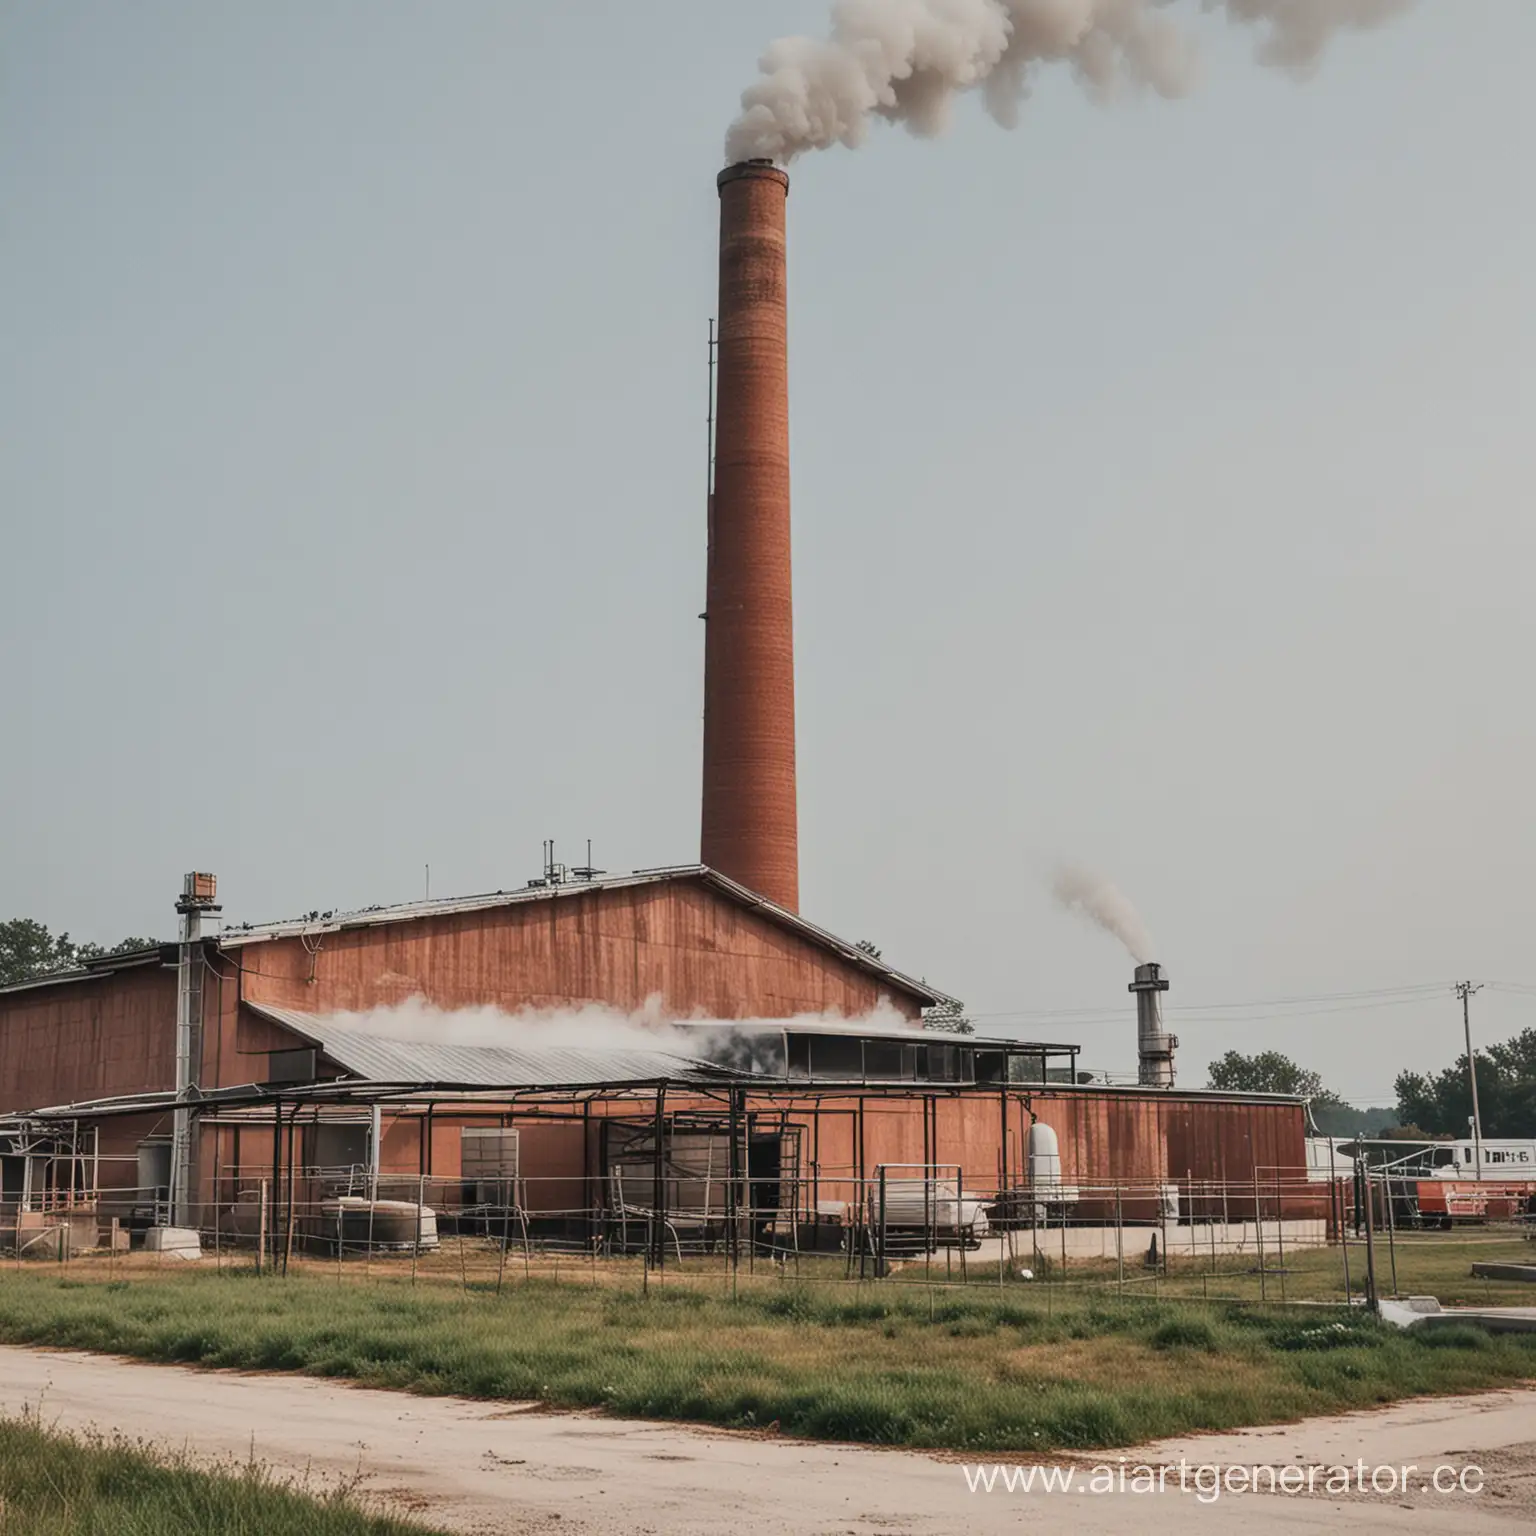 Outdoor-Meat-Processing-Plant-with-Smoking-Chimney